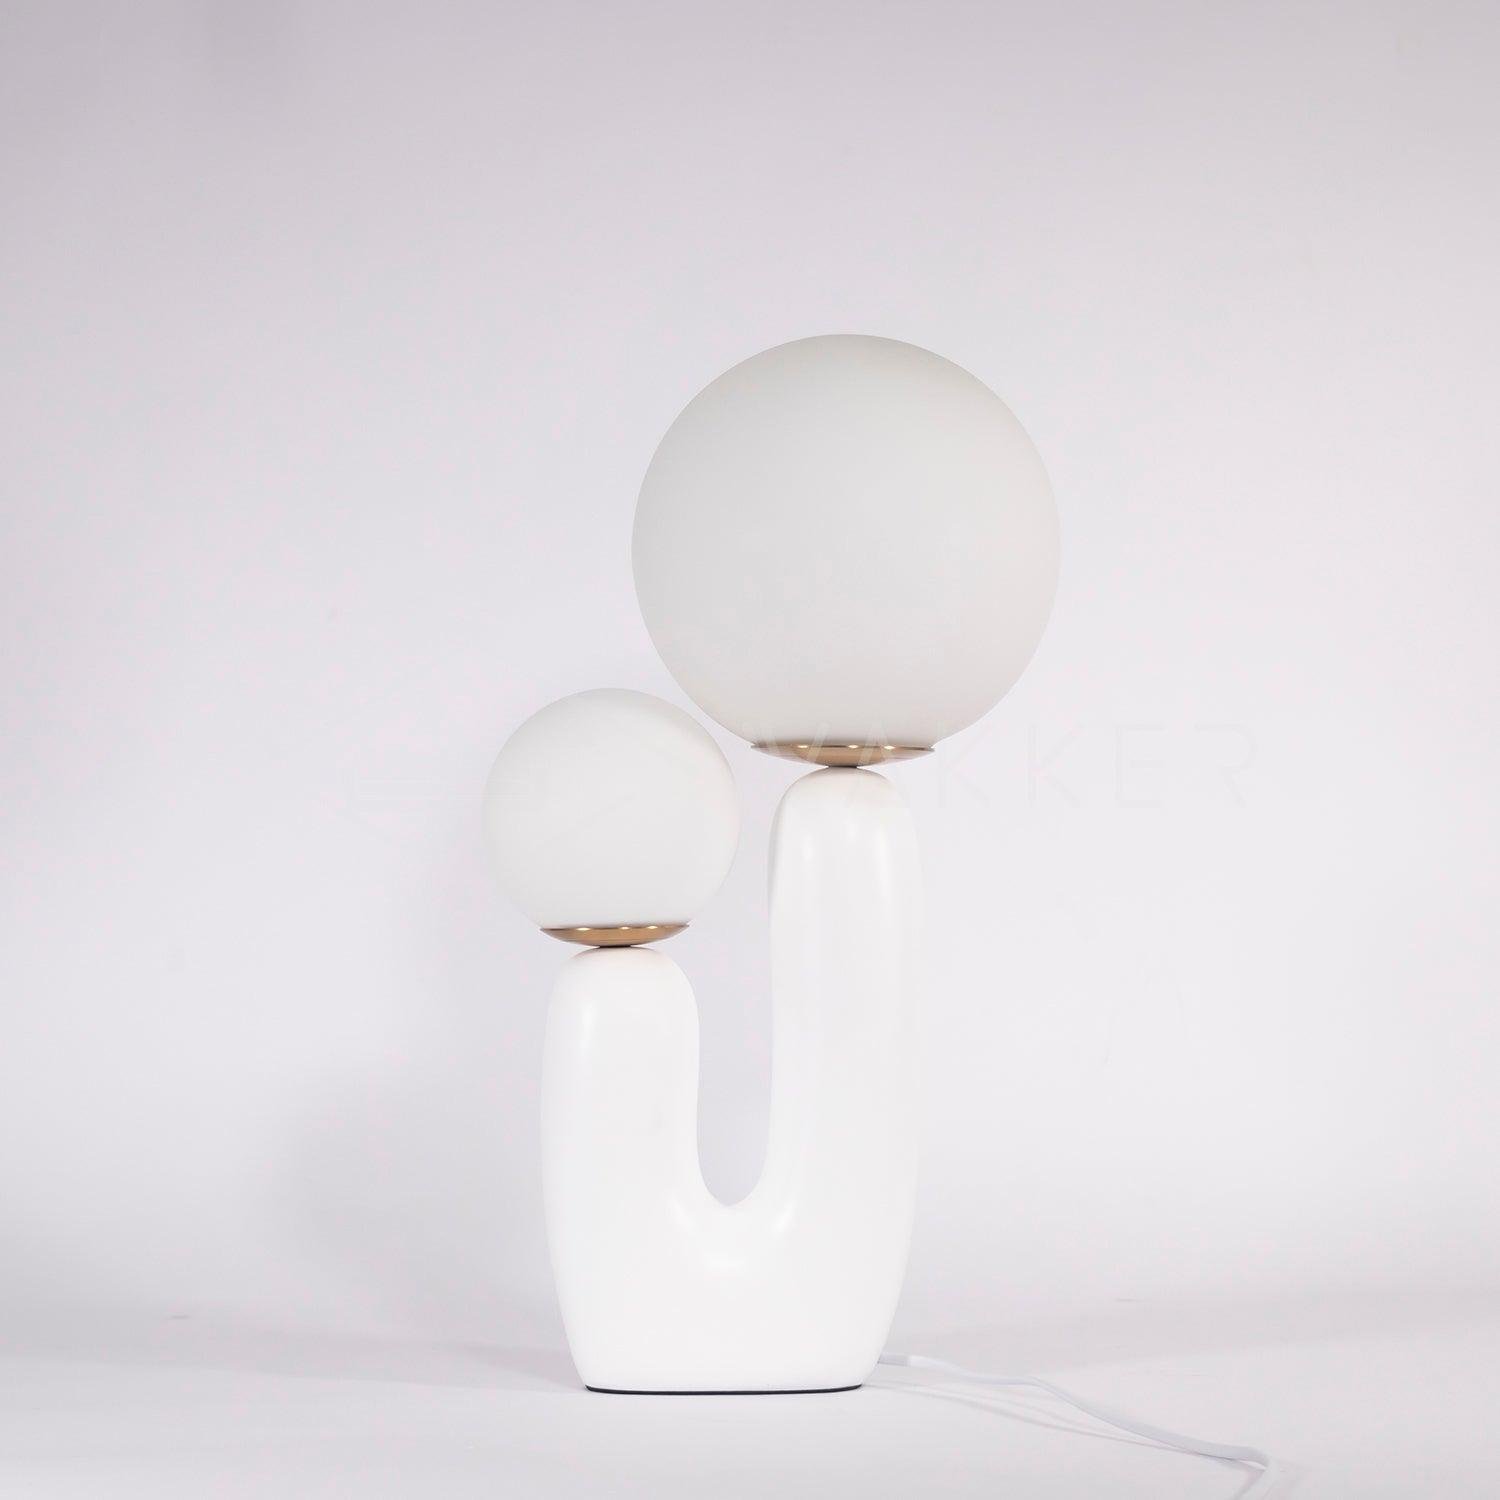 Smooth Table Lamp in White with UK Plug, measuring 10.2" in diameter and 16.5" in height (26cm x 42cm).